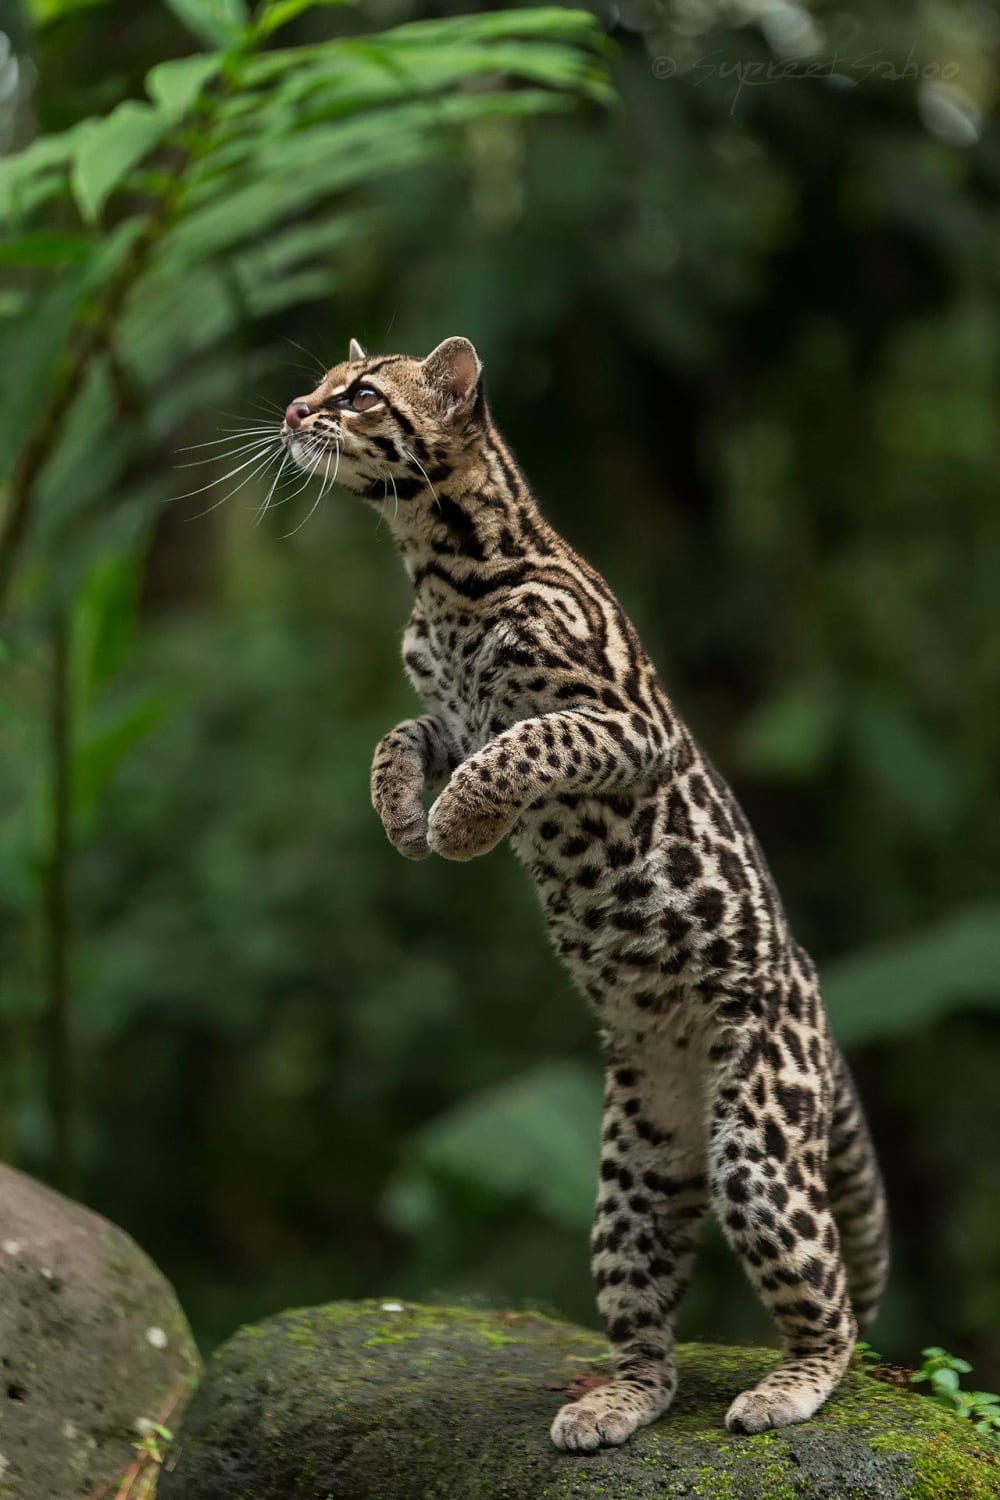 Margays are a wild cat found in South America. They can spend their entire lives in the trees, and are one of only two cat species whose ankles let them climb head-first down a tree. Their population is declining so we can have more beef.